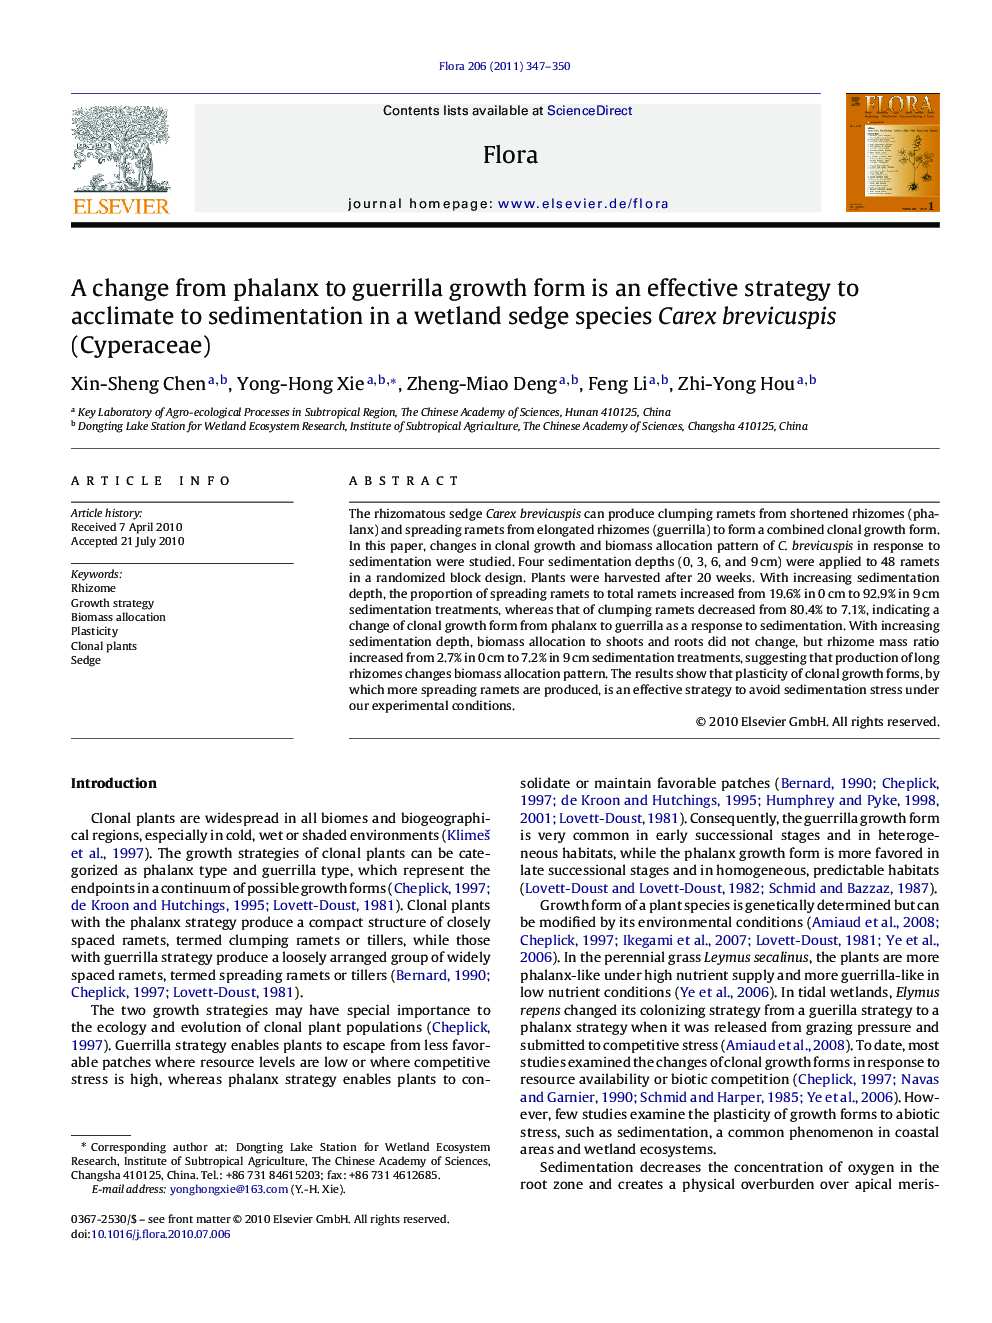 A change from phalanx to guerrilla growth form is an effective strategy to acclimate to sedimentation in a wetland sedge species Carex brevicuspis (Cyperaceae)